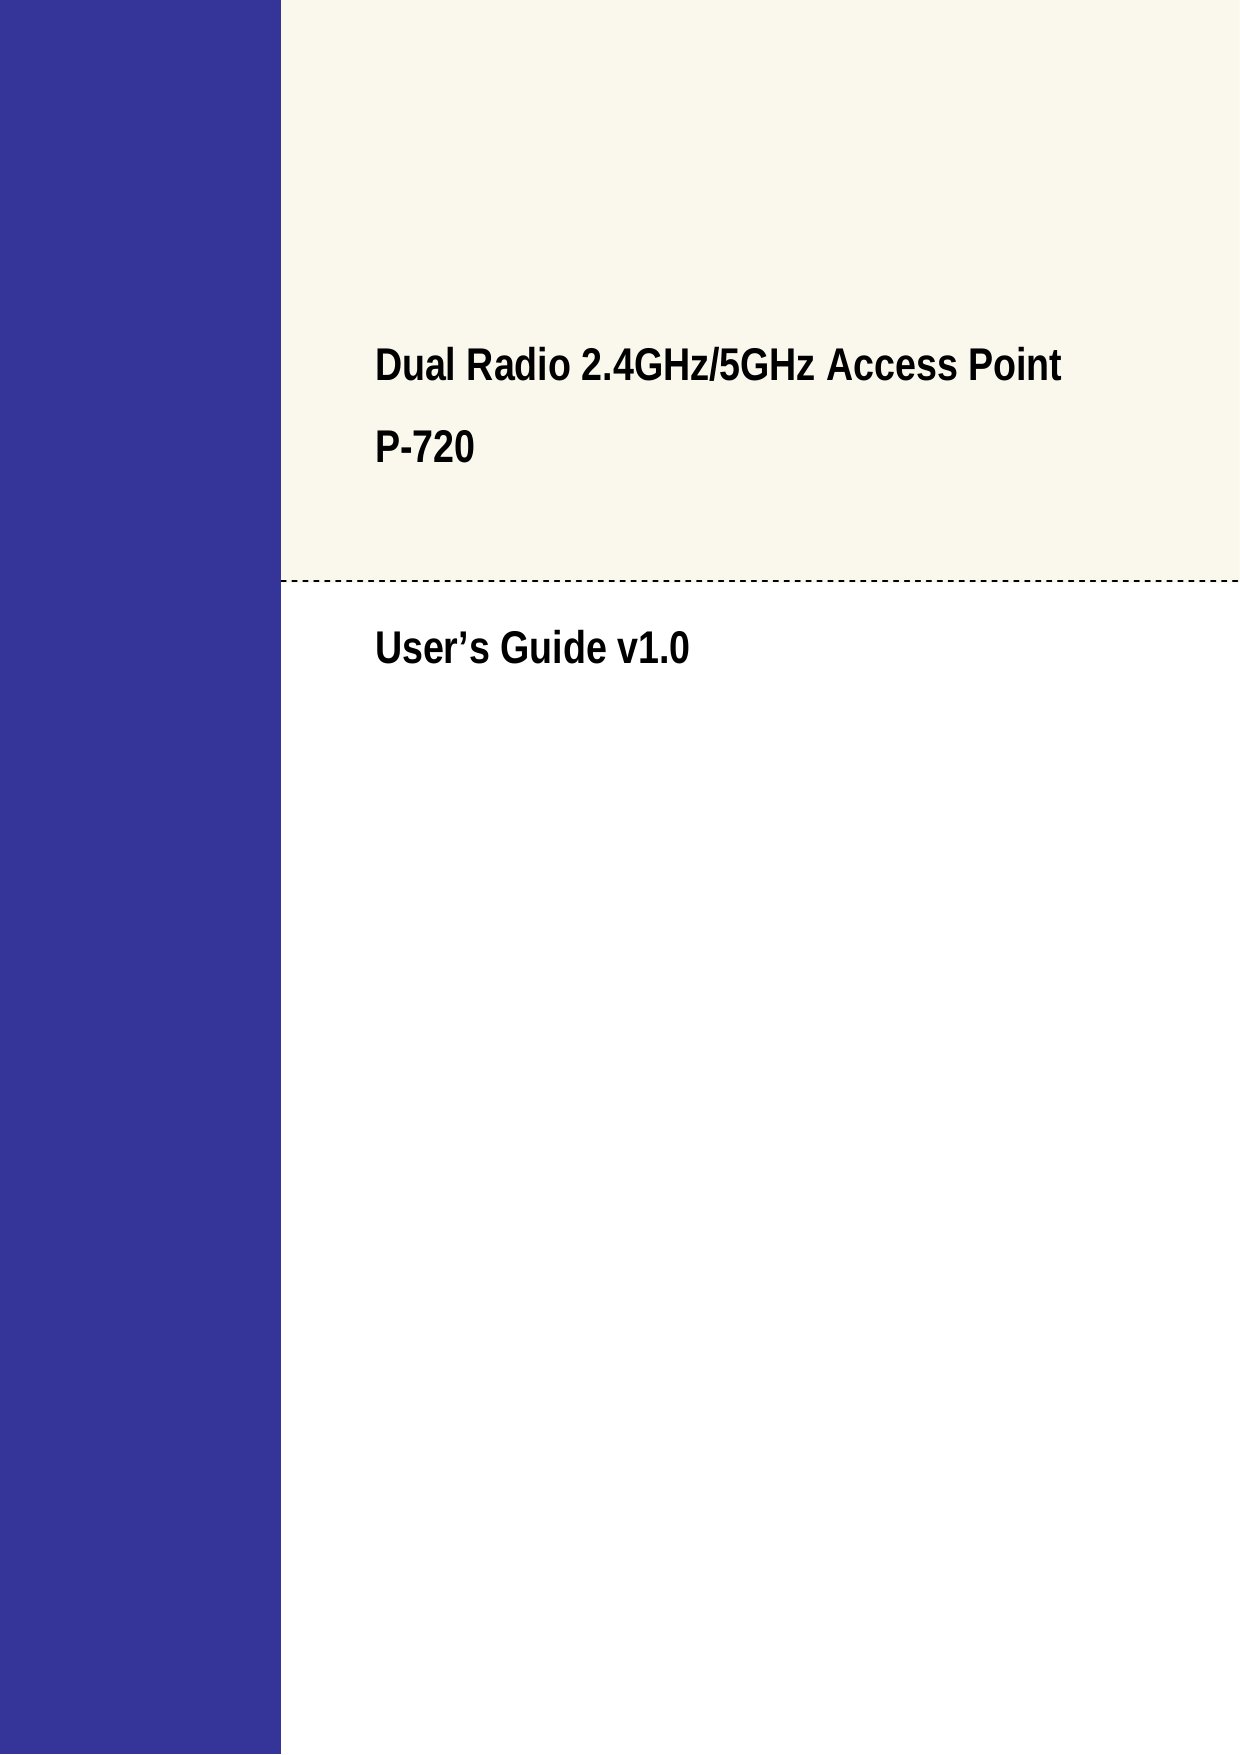   Dual Radio 2.4GHz/5GHz Access Point P-720  User’s Guide v1.0    